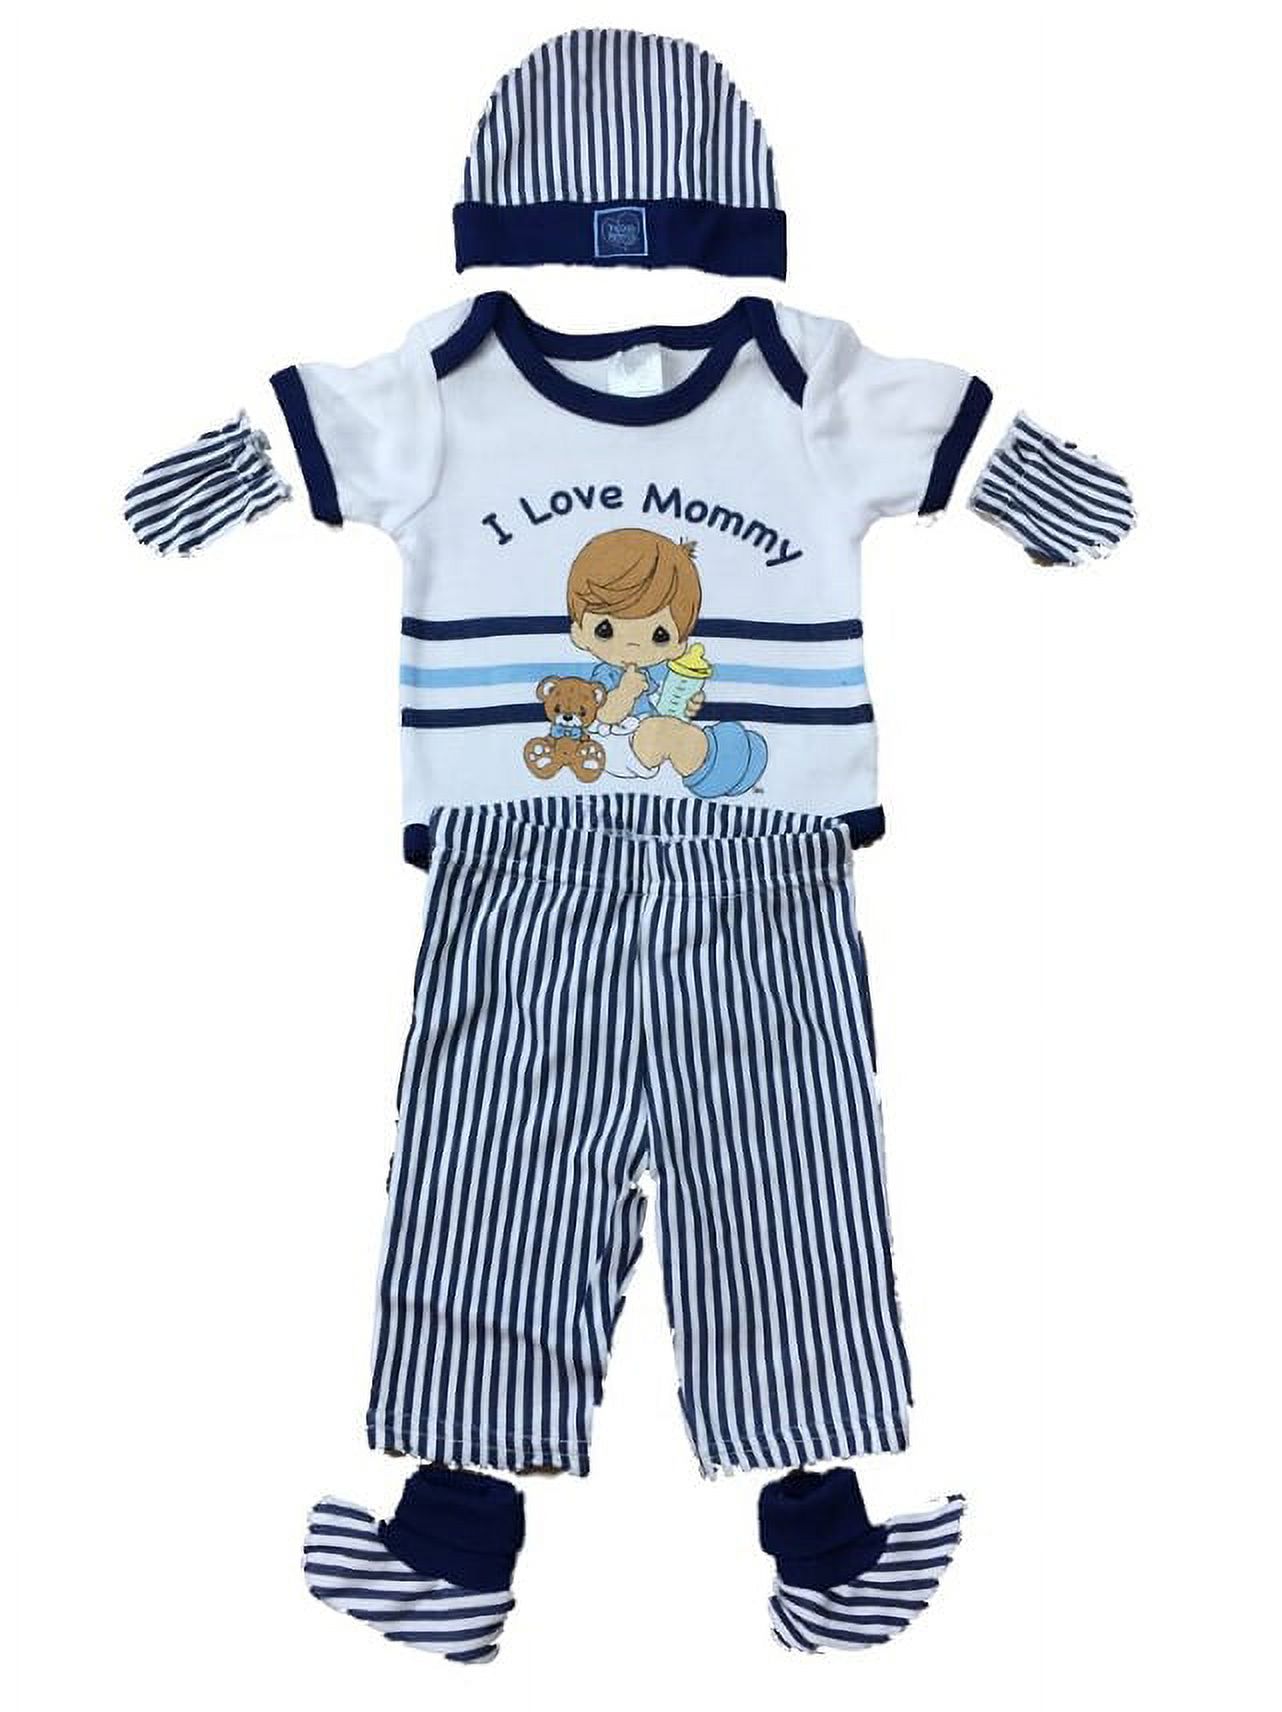 Infant Boys Precious Moments Baby Outfit Bodysuit Pants Hat Booties Mittens 0-3m - image 1 of 1